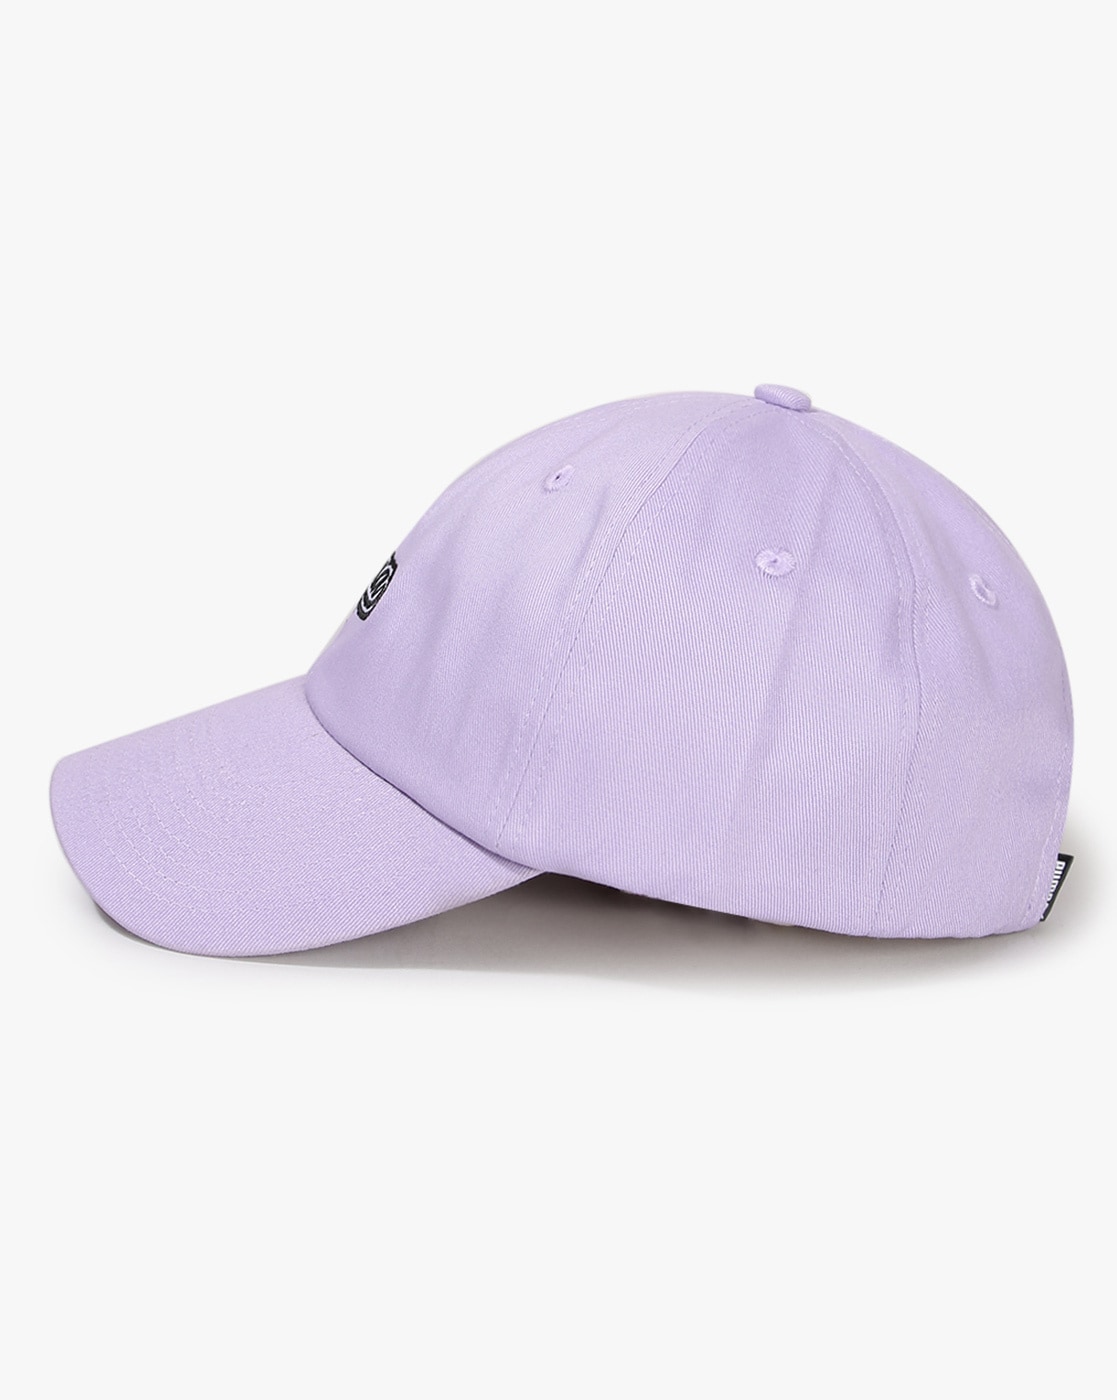 Puma Baseball Cap with Embroidery For Men (Purple, OS)